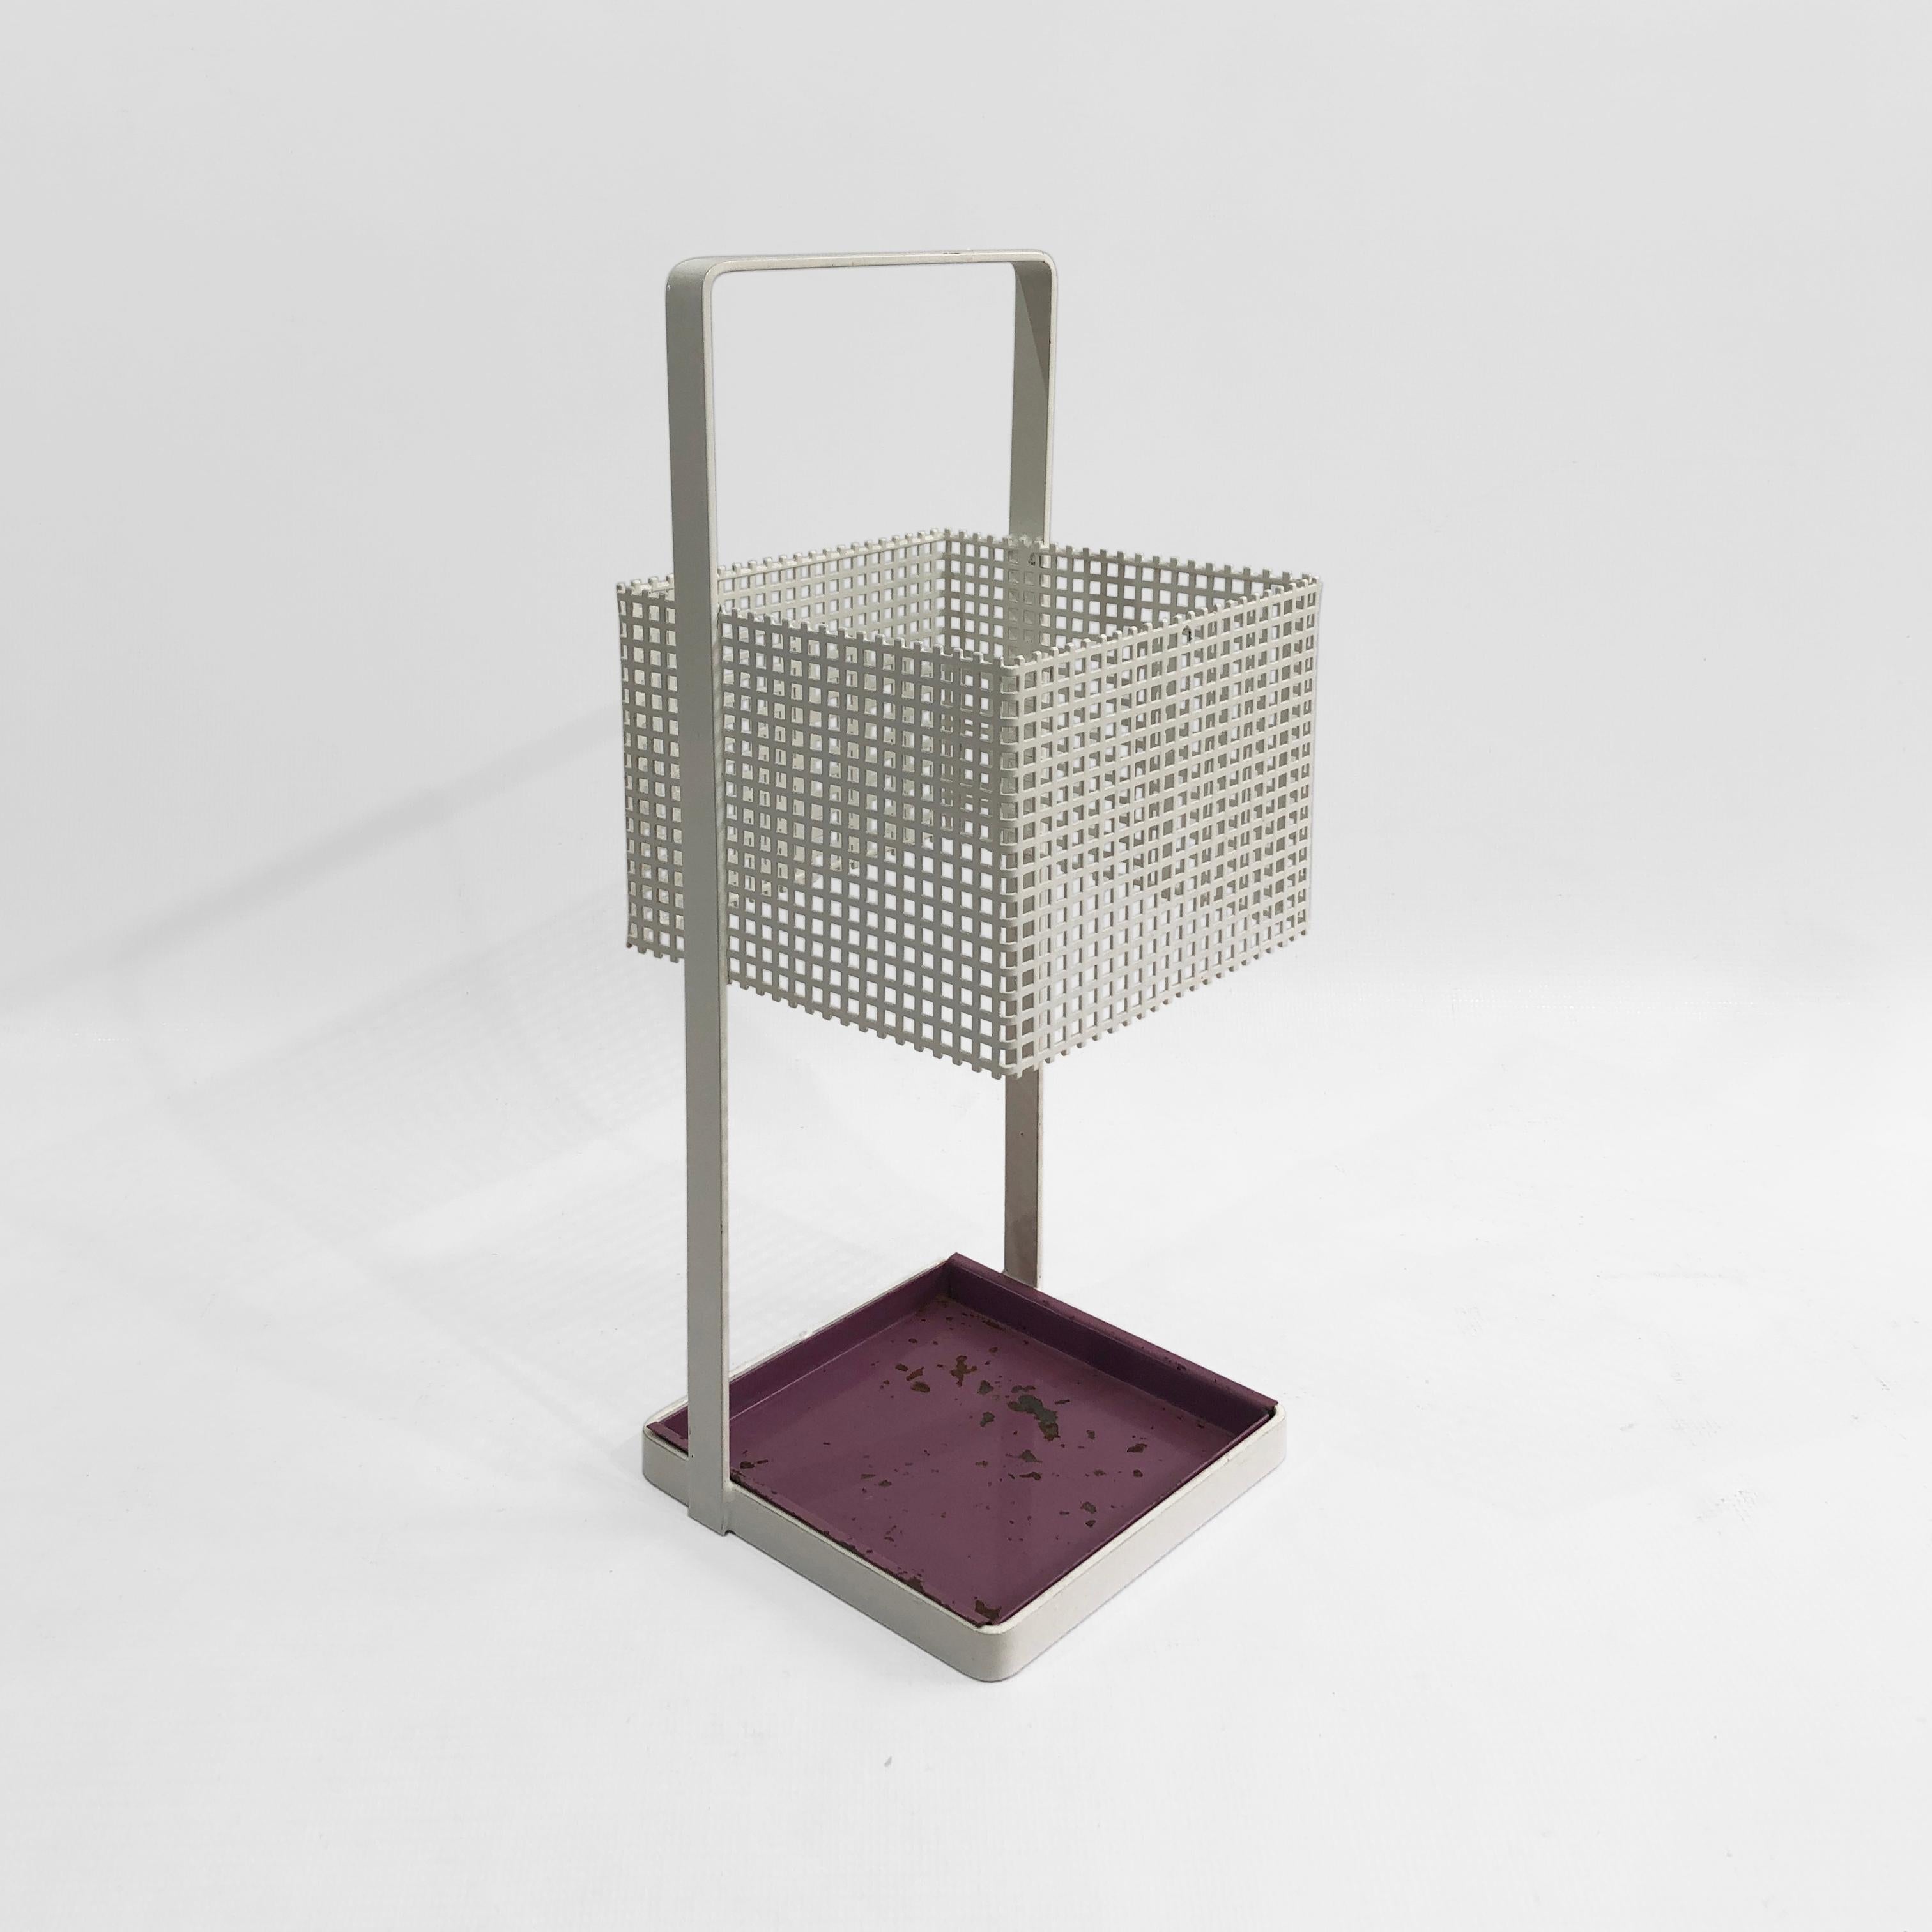 This modernist square umbrella stand of white powder-coated metal is a rare design Classic, from the renowned Josef Hoffmann for Bieffeplast. A square basket, with hundred of tiny square holes, is suspended from a white frame. At the base is a rich